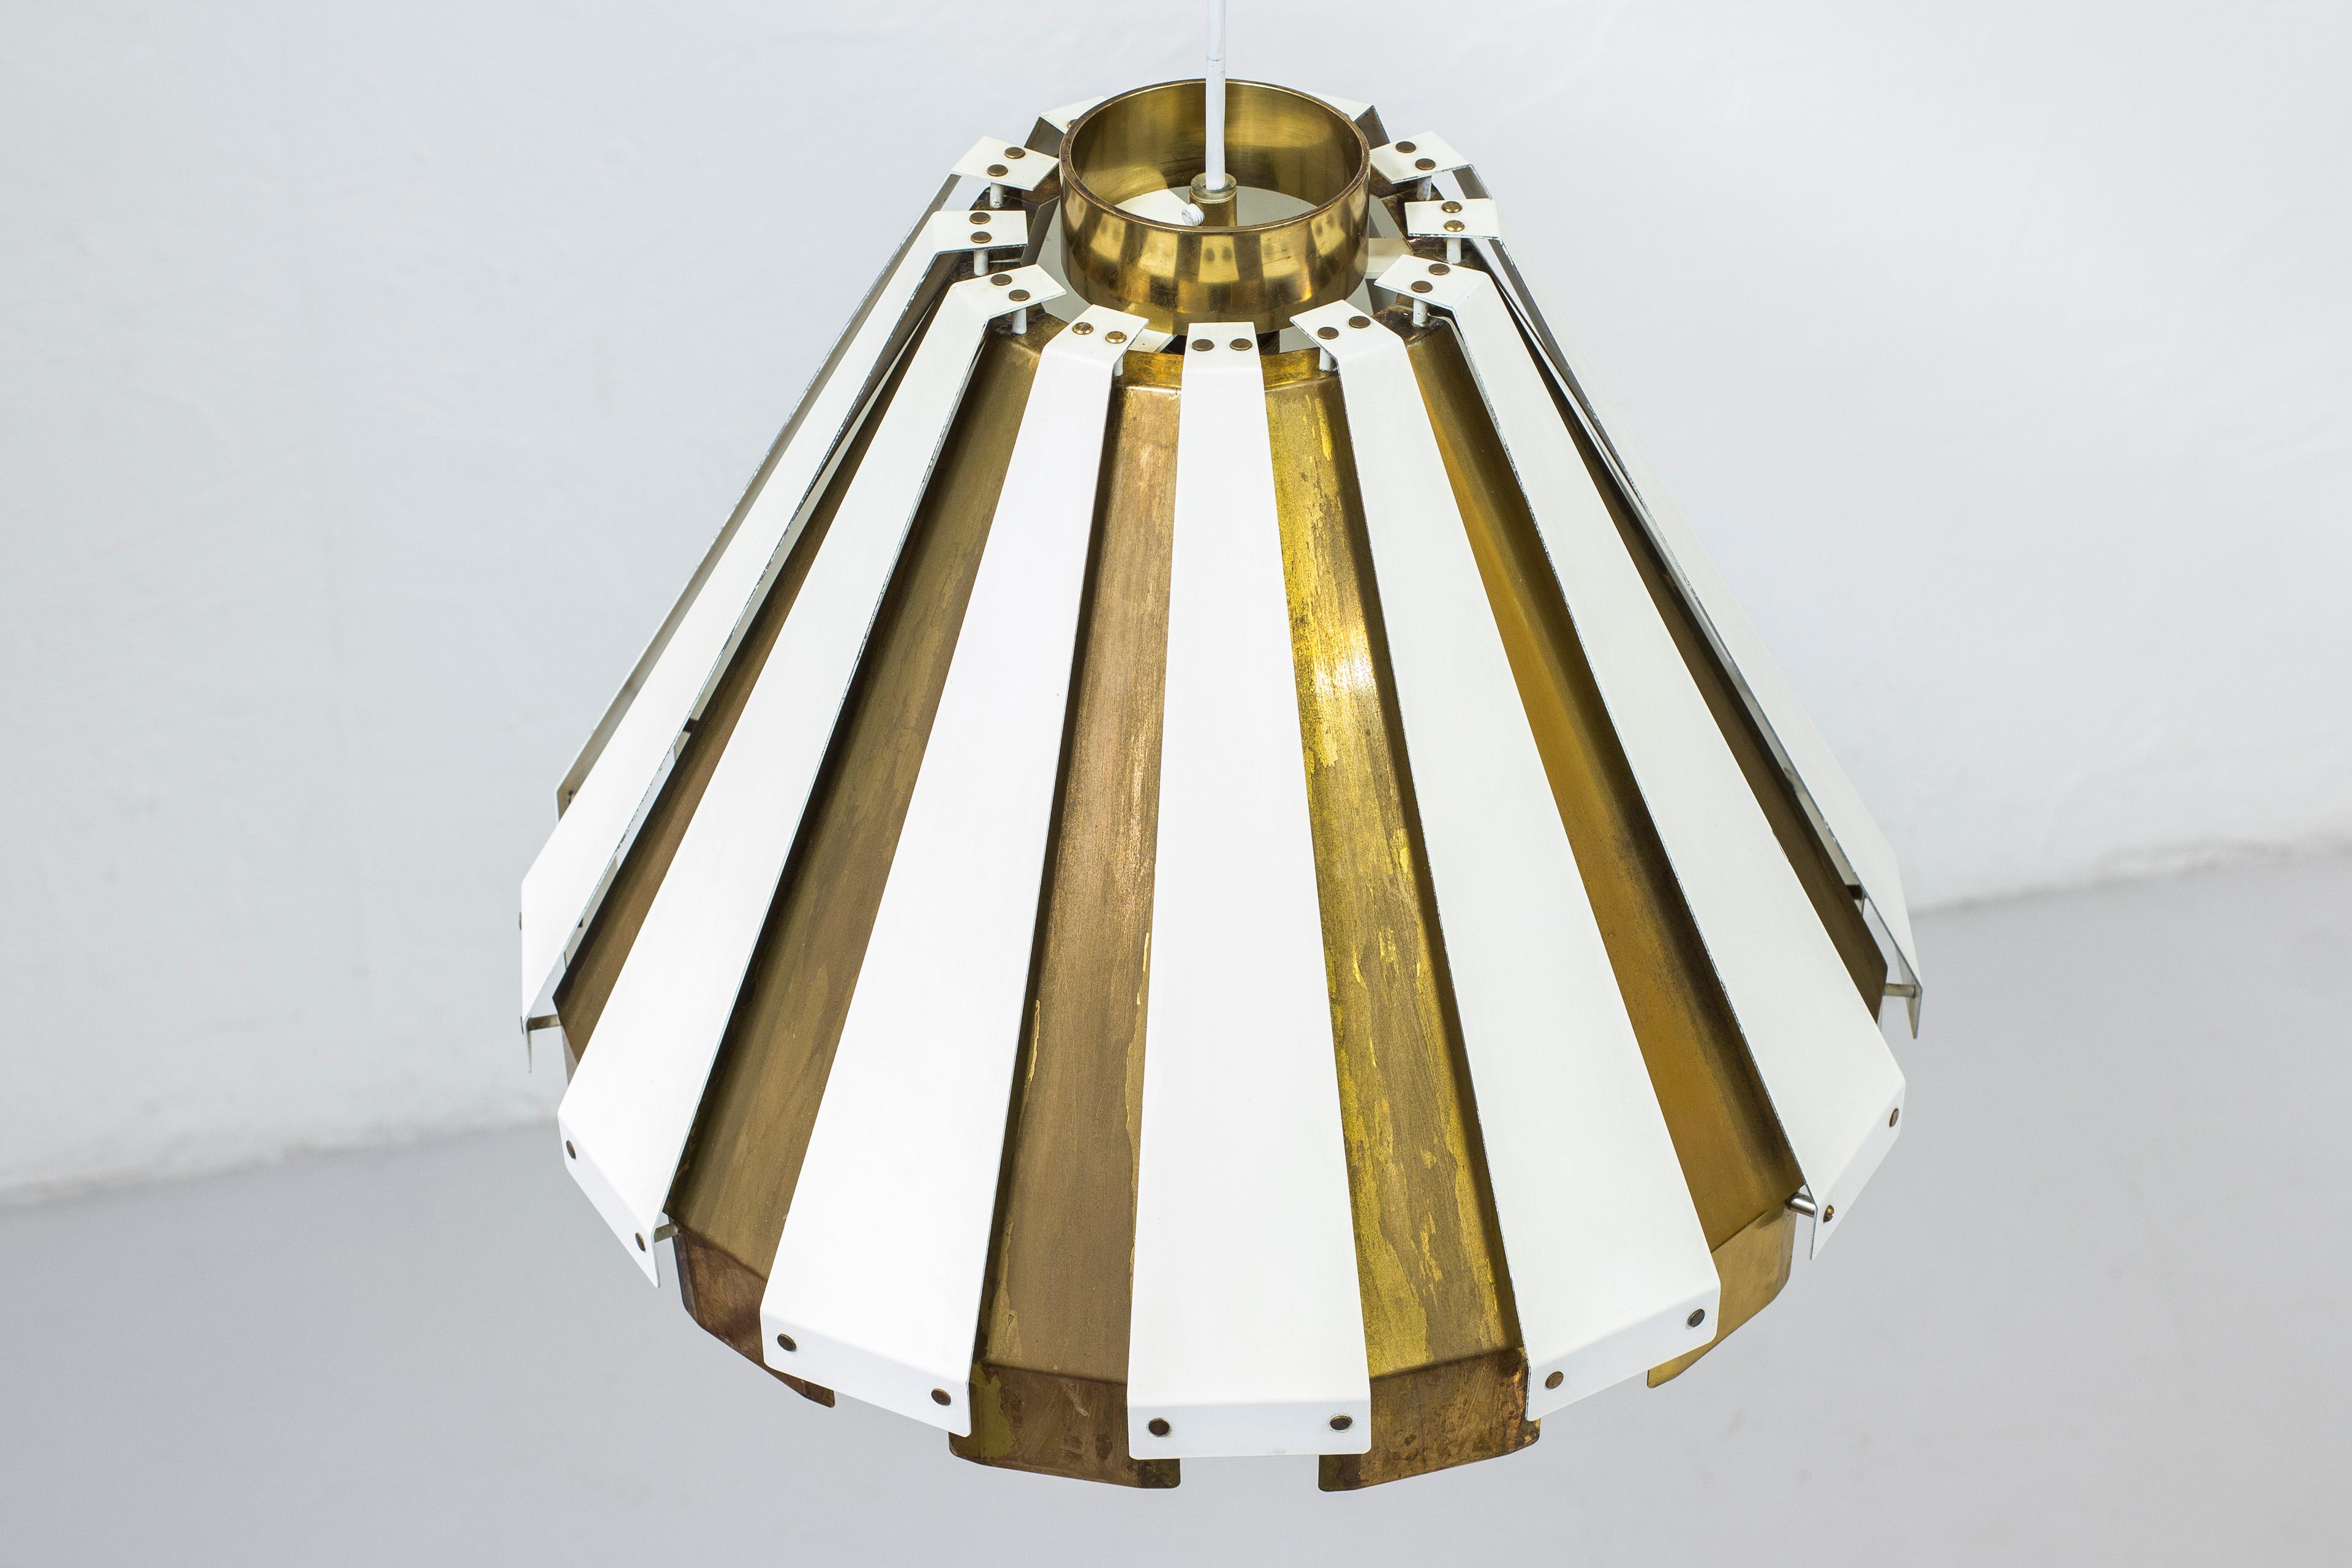 Rare ceiling lamp designed by Hans Agne Jakobsson. produced by his own company in Sweden during the 1950s. Made from white lacquered aluminum and brass. Original ceiling mount with label. Good vintage condition with some age related wear and